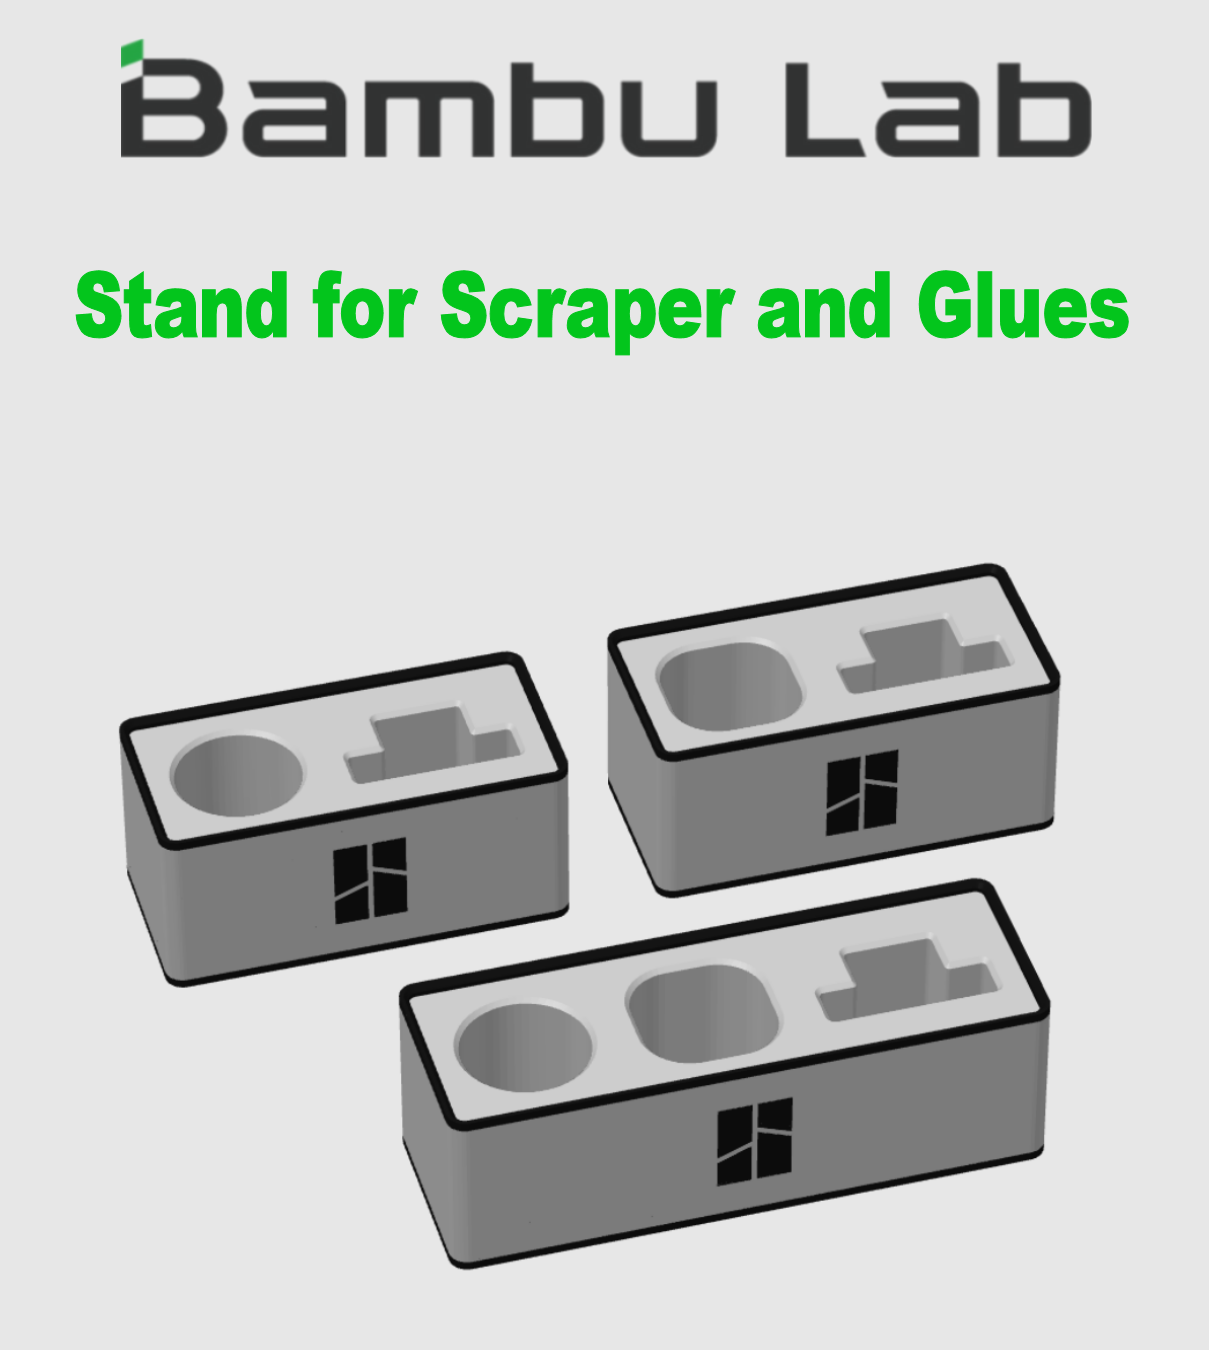 Bambu Lab - Xiaomi Temperature and humidity sensor for AMS system and  Printers - Works With Mobile App by Damian, Download free STL model